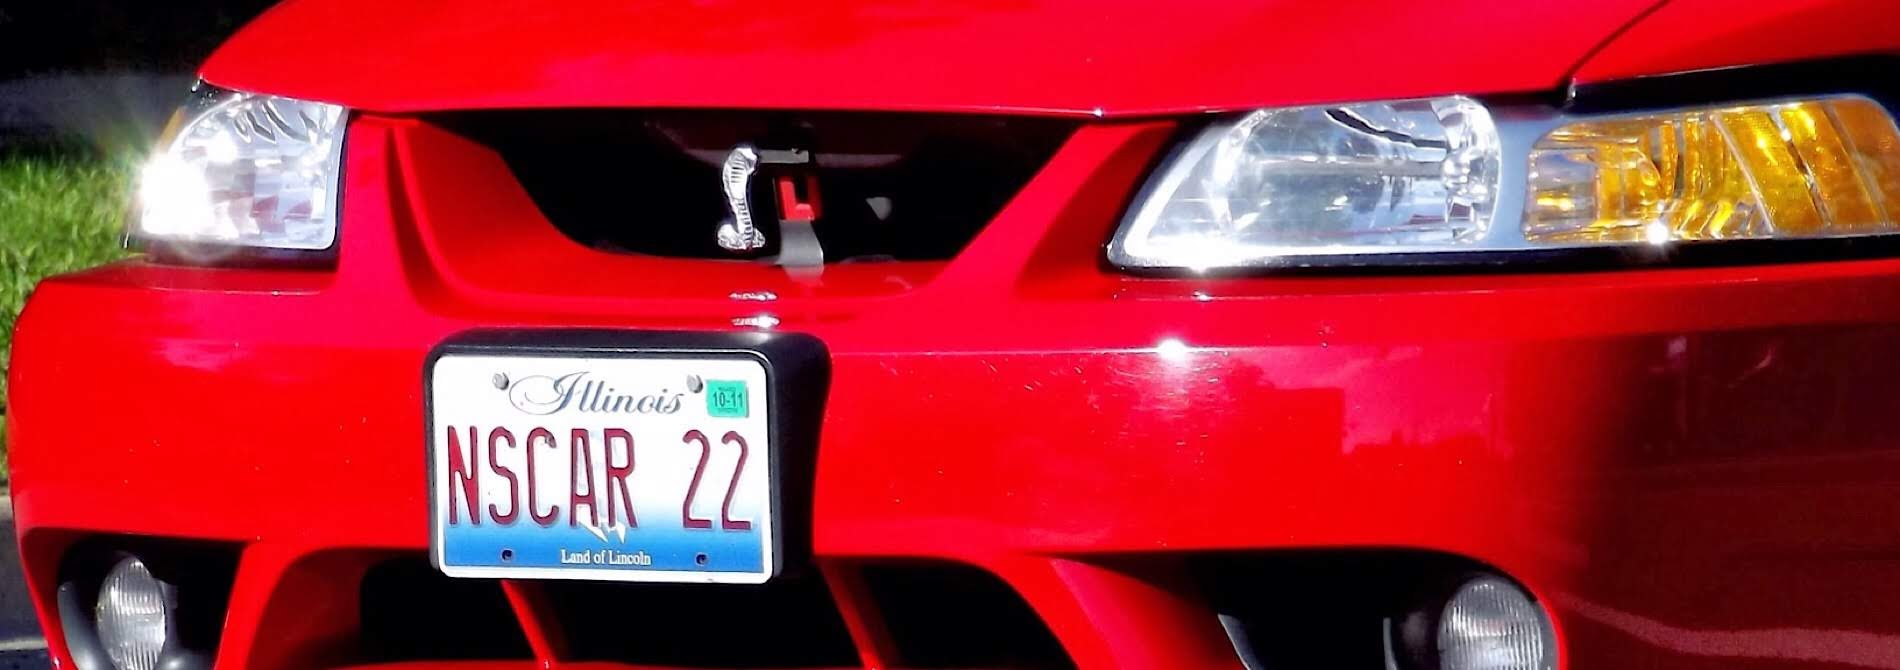 shiny red car with NSCAR22 license plate